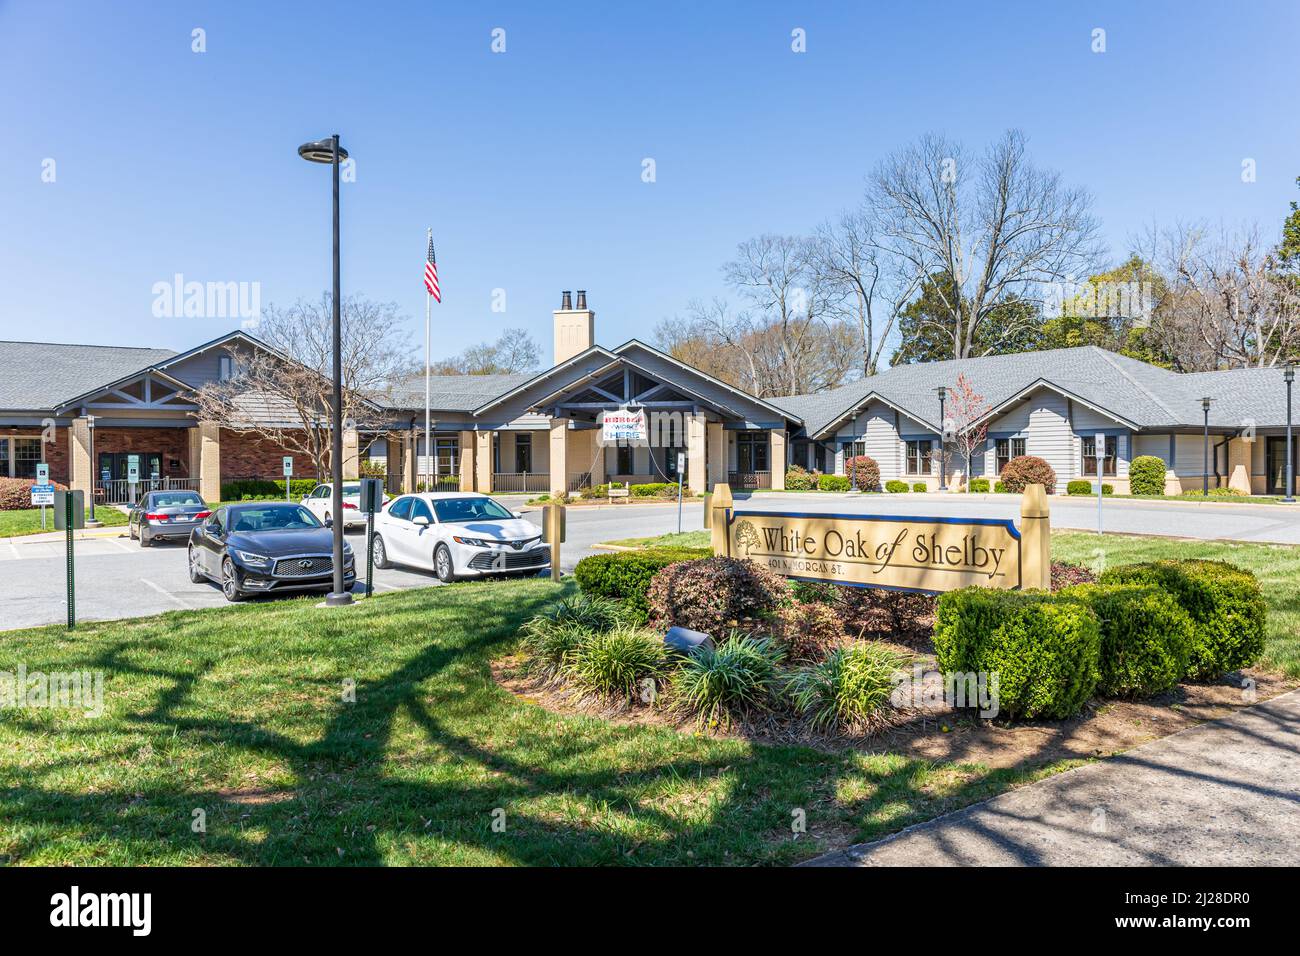 SHELBY, NC, USA-28 MARCH 2022: White Oak of Shelby, a 160 bed skilled nursing center on Morgan St. near downtown. Building, monument sign and shrubs. Stock Photo